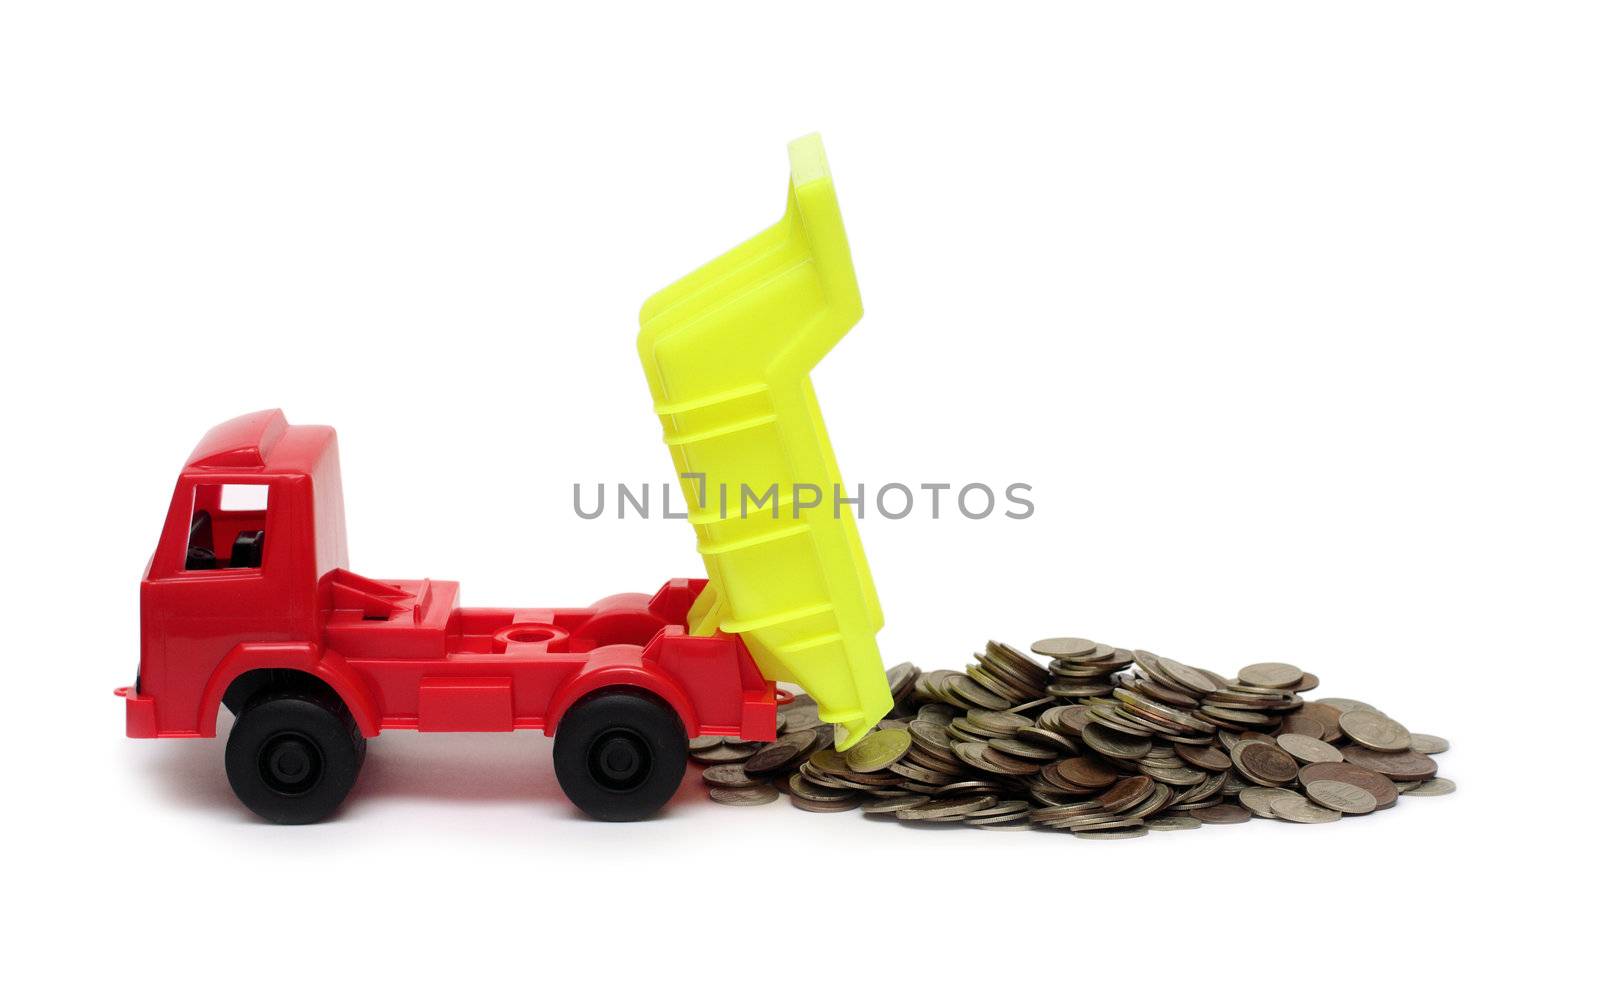 toy lorry and strew coins - business concept